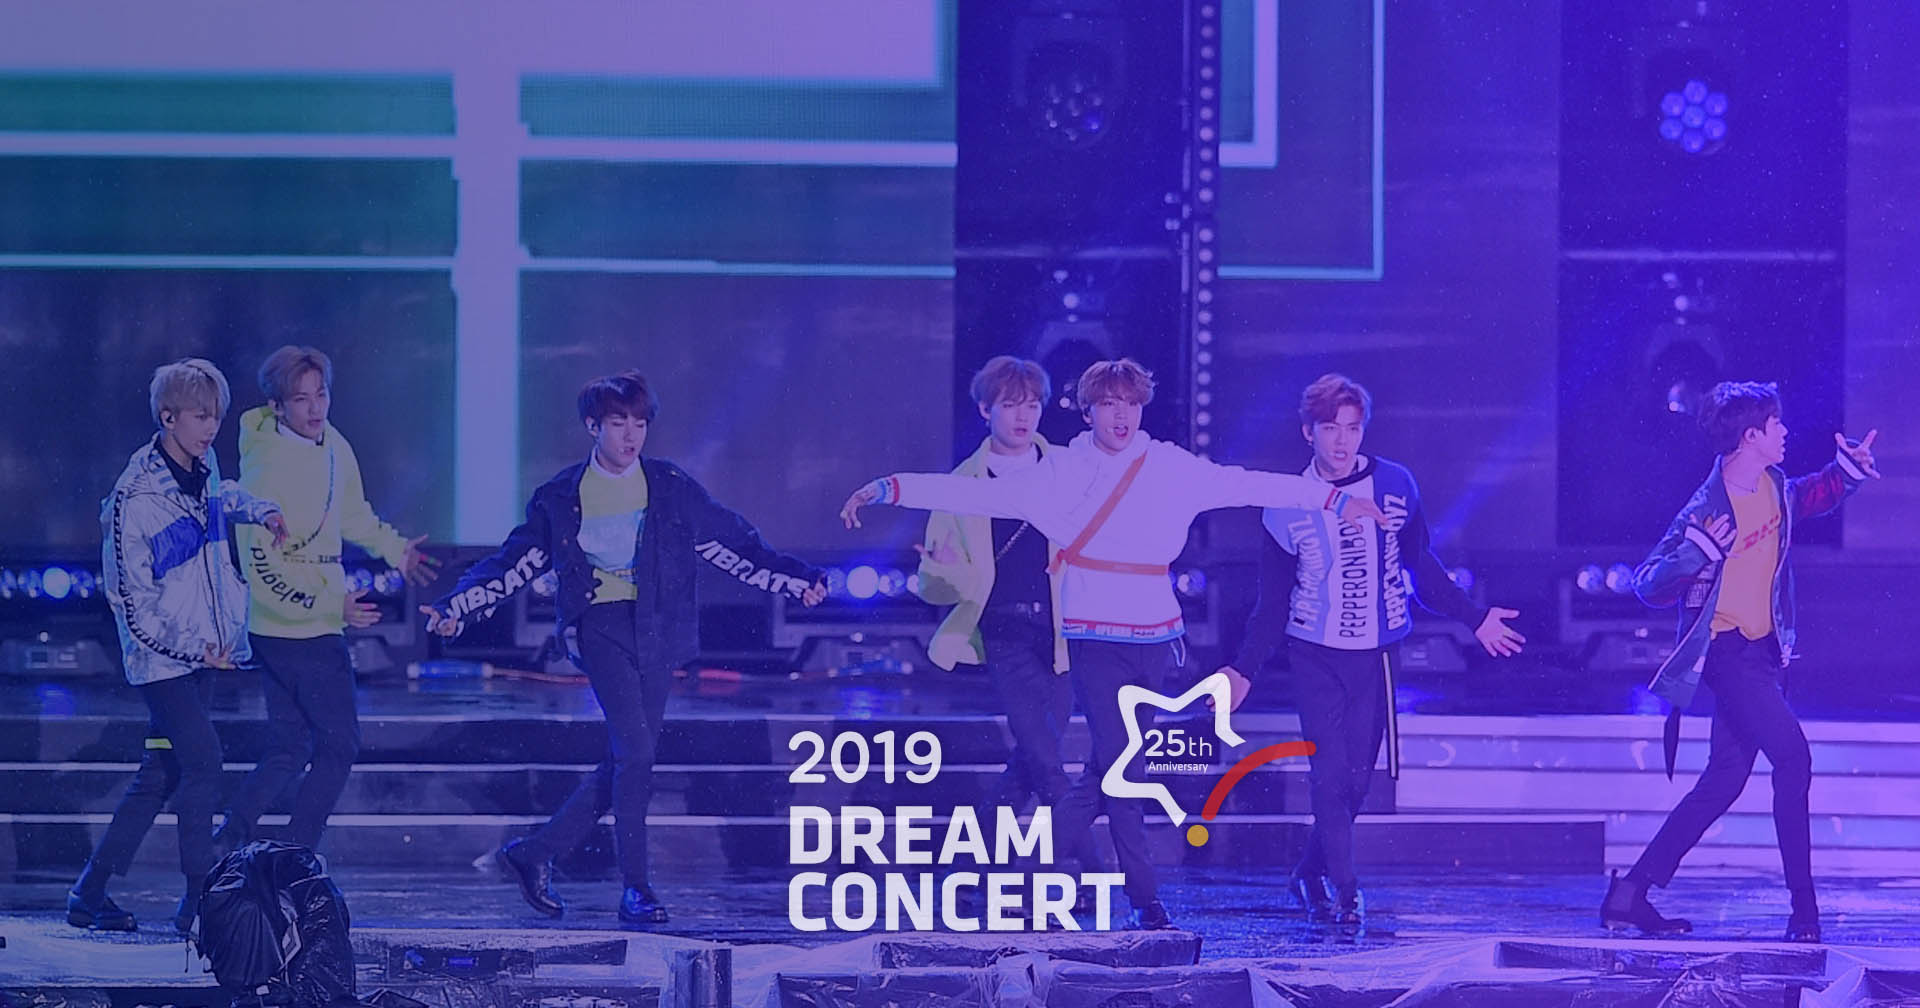 2019 Dream Concert, officially confirmed on May 18